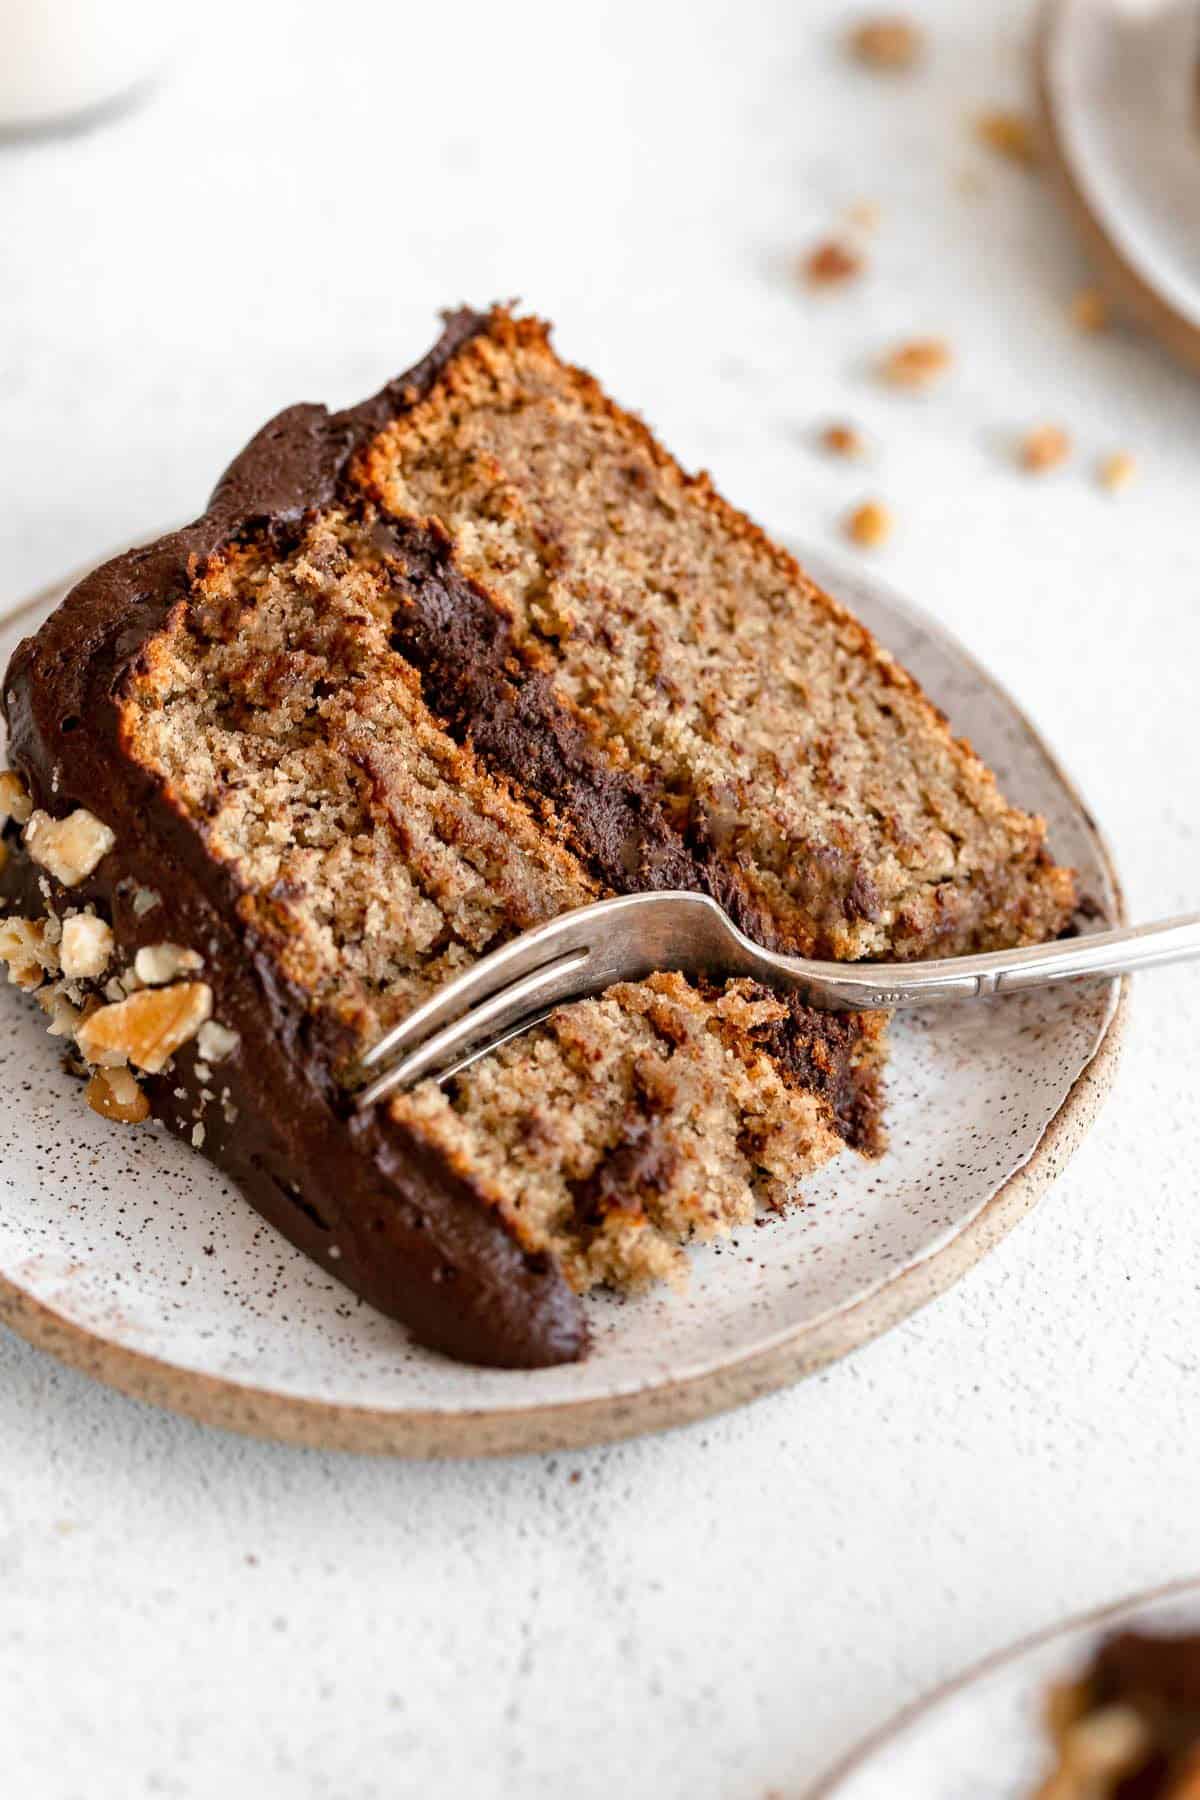 Up close image of a slice of the vegan banana cake on a plate with a fork